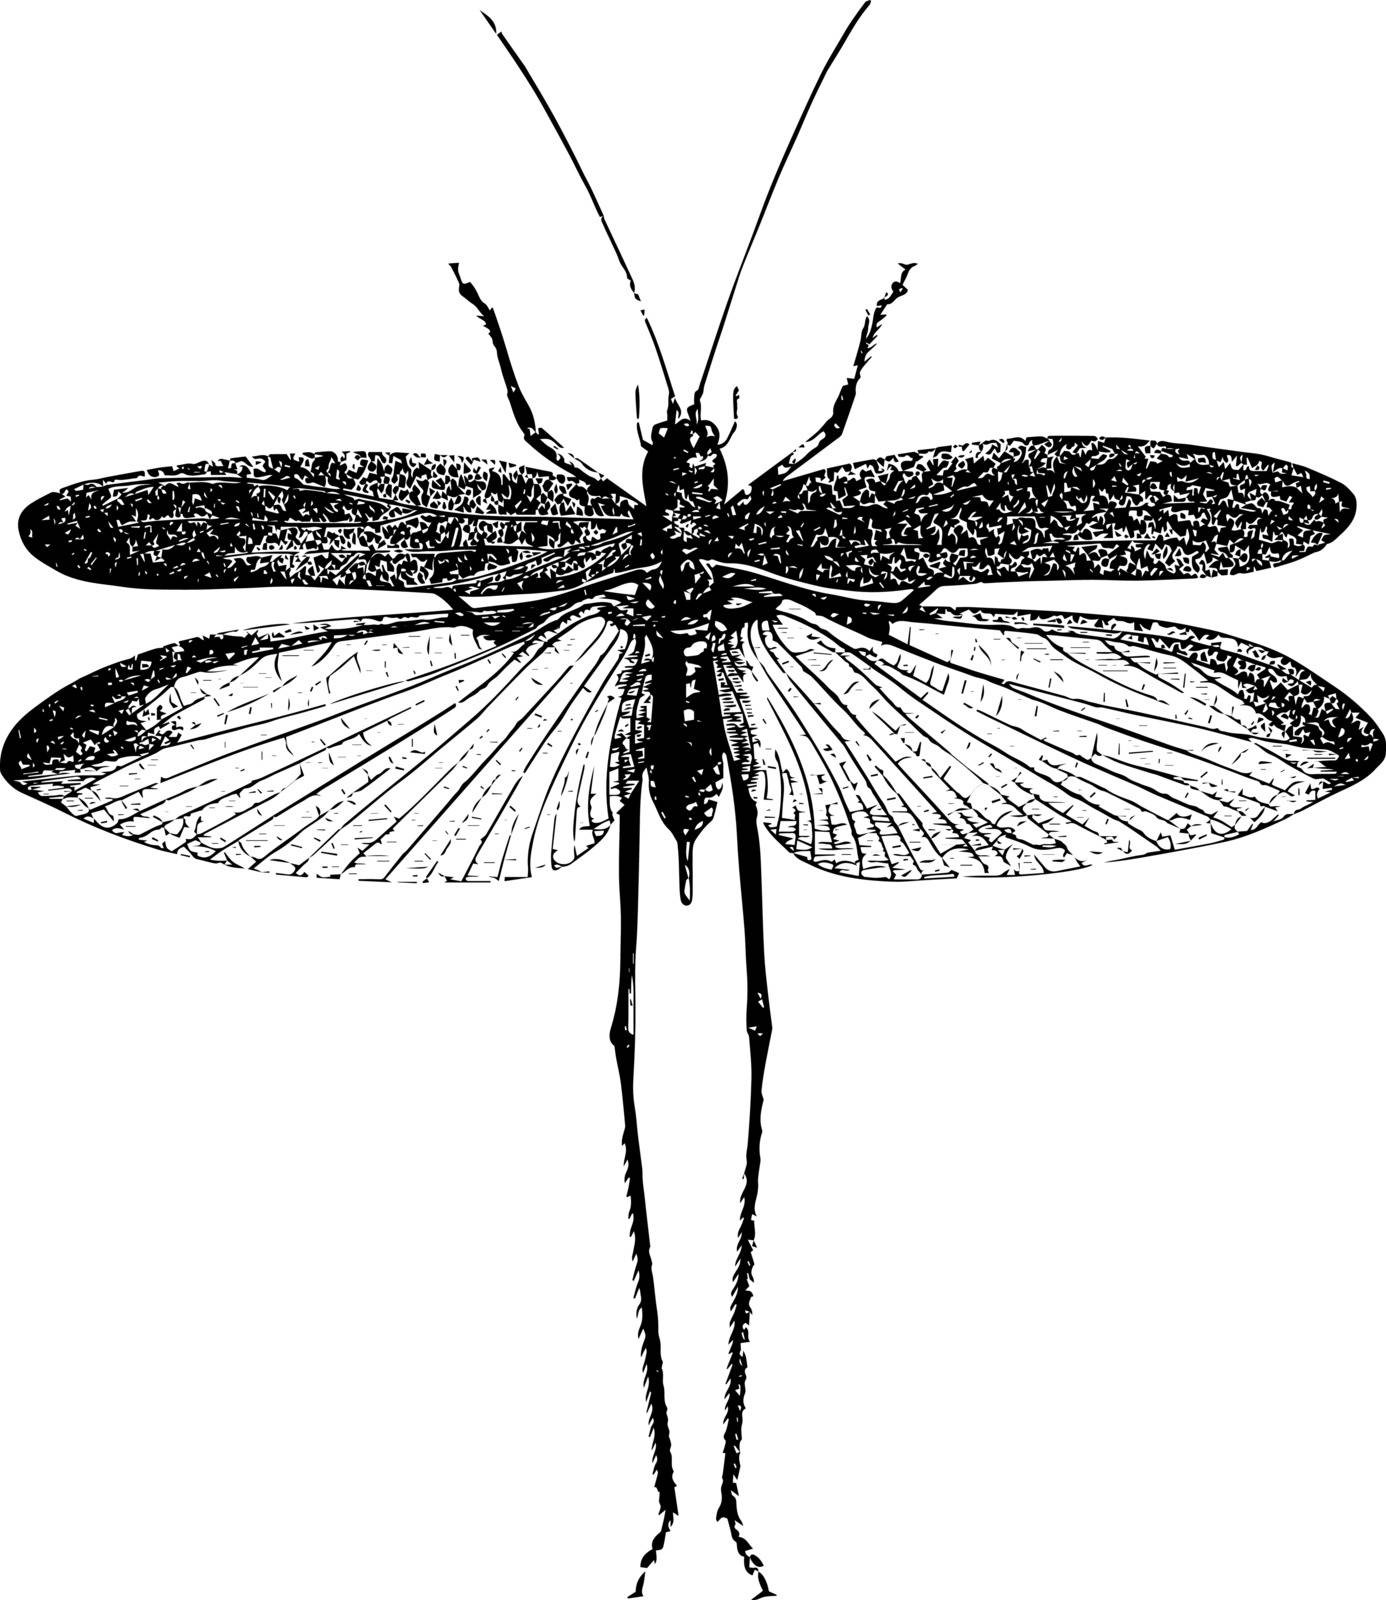 Narrow Leaved Grasshopper is herbivorous insects of the suborder Ceasefire in the order Orthoptera vintage line drawing or engraving illustration.